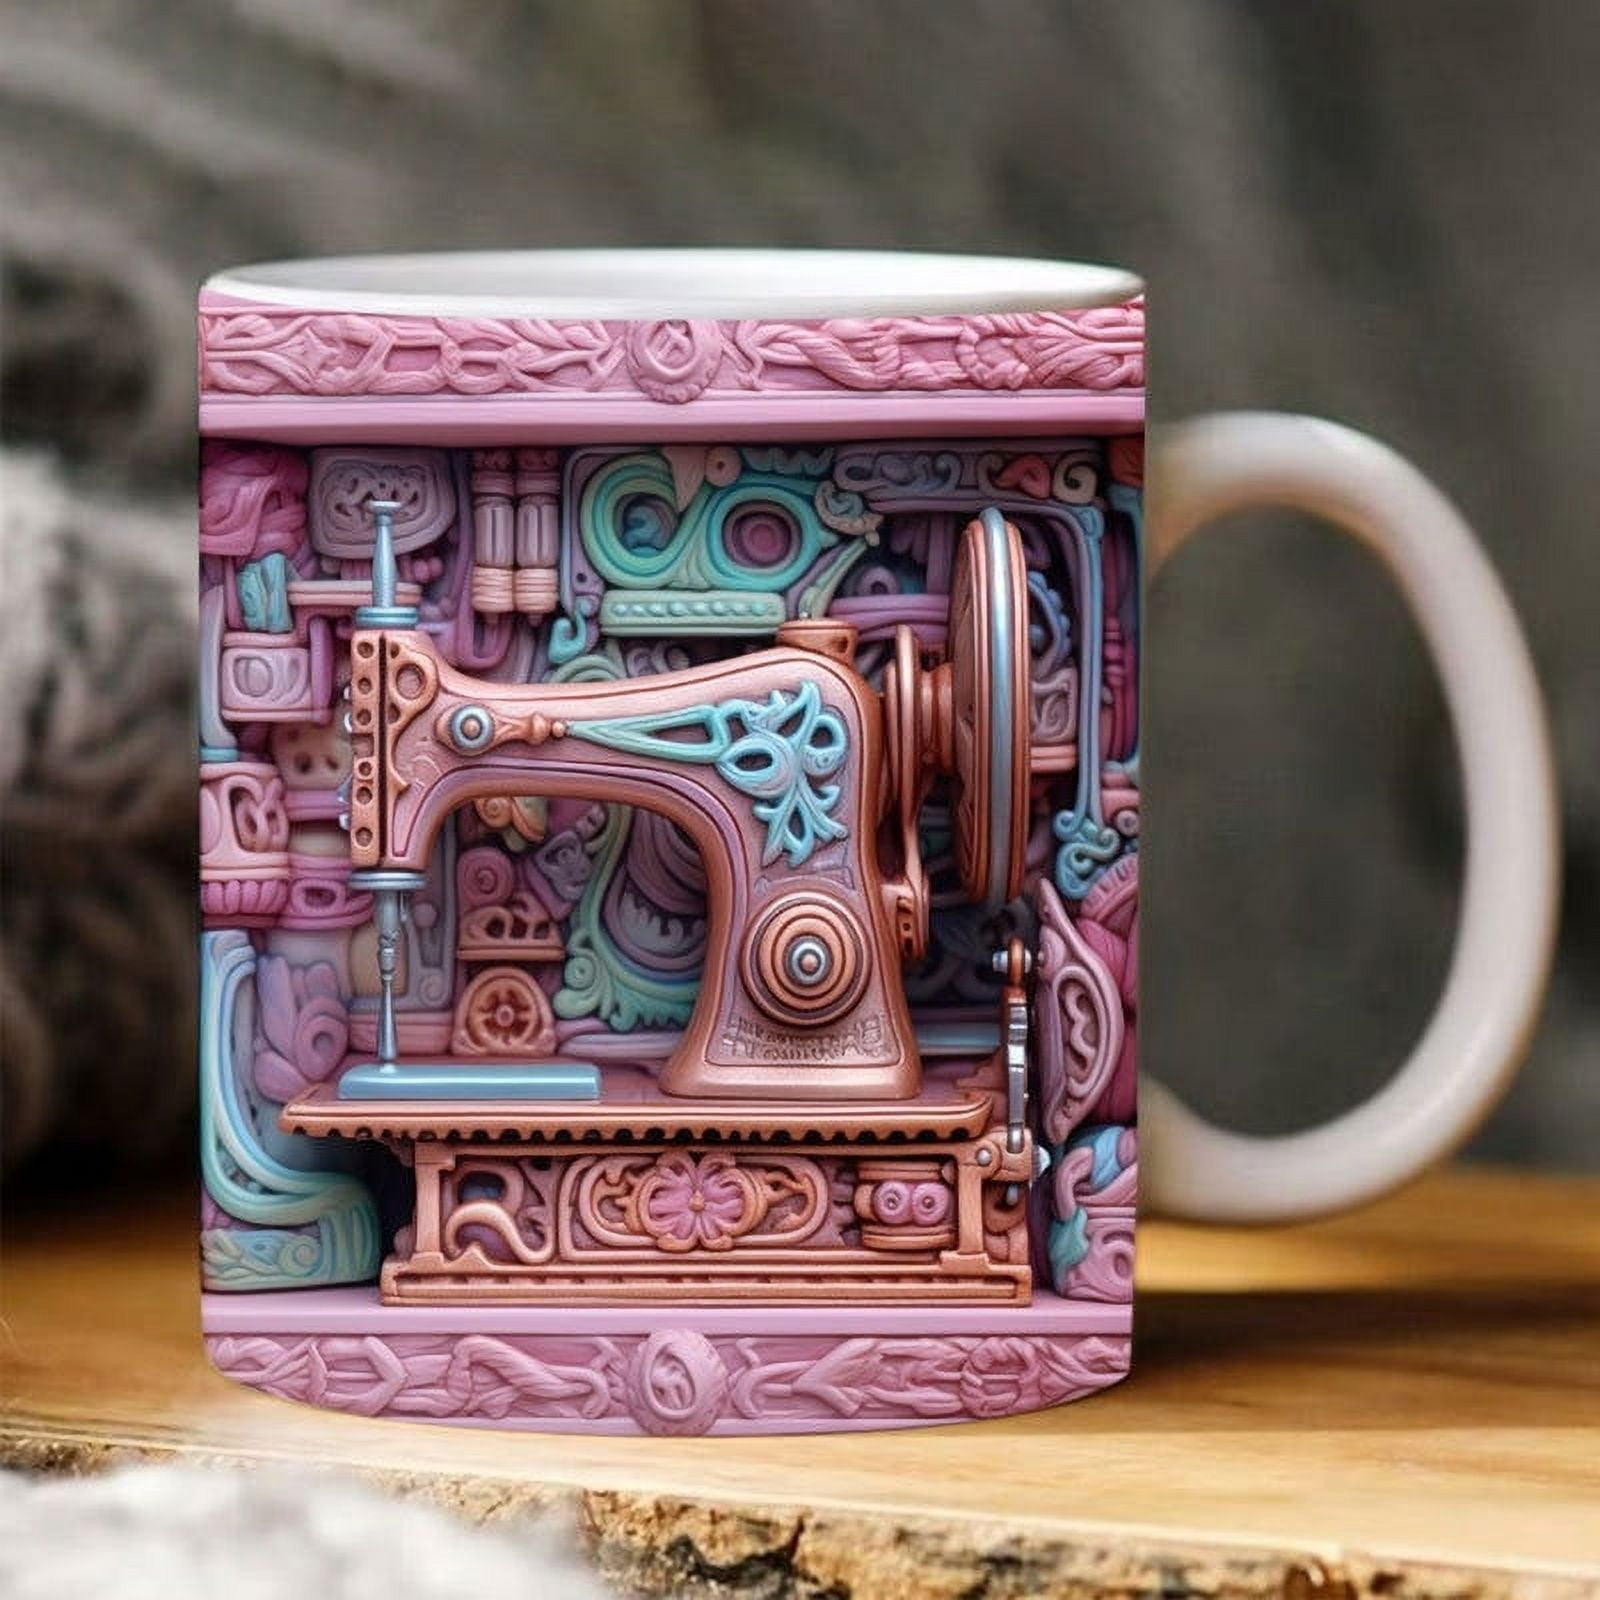 XEOVHV Clearance Sewing 3D Mug 11oz,Sewing Gifts for Women, Quilting Gifts, Sewing  Gifts for Quilters, Quilting Gifts for Quilters, Sewing Machine Cup, Gifts  for People Who Like To Sew 